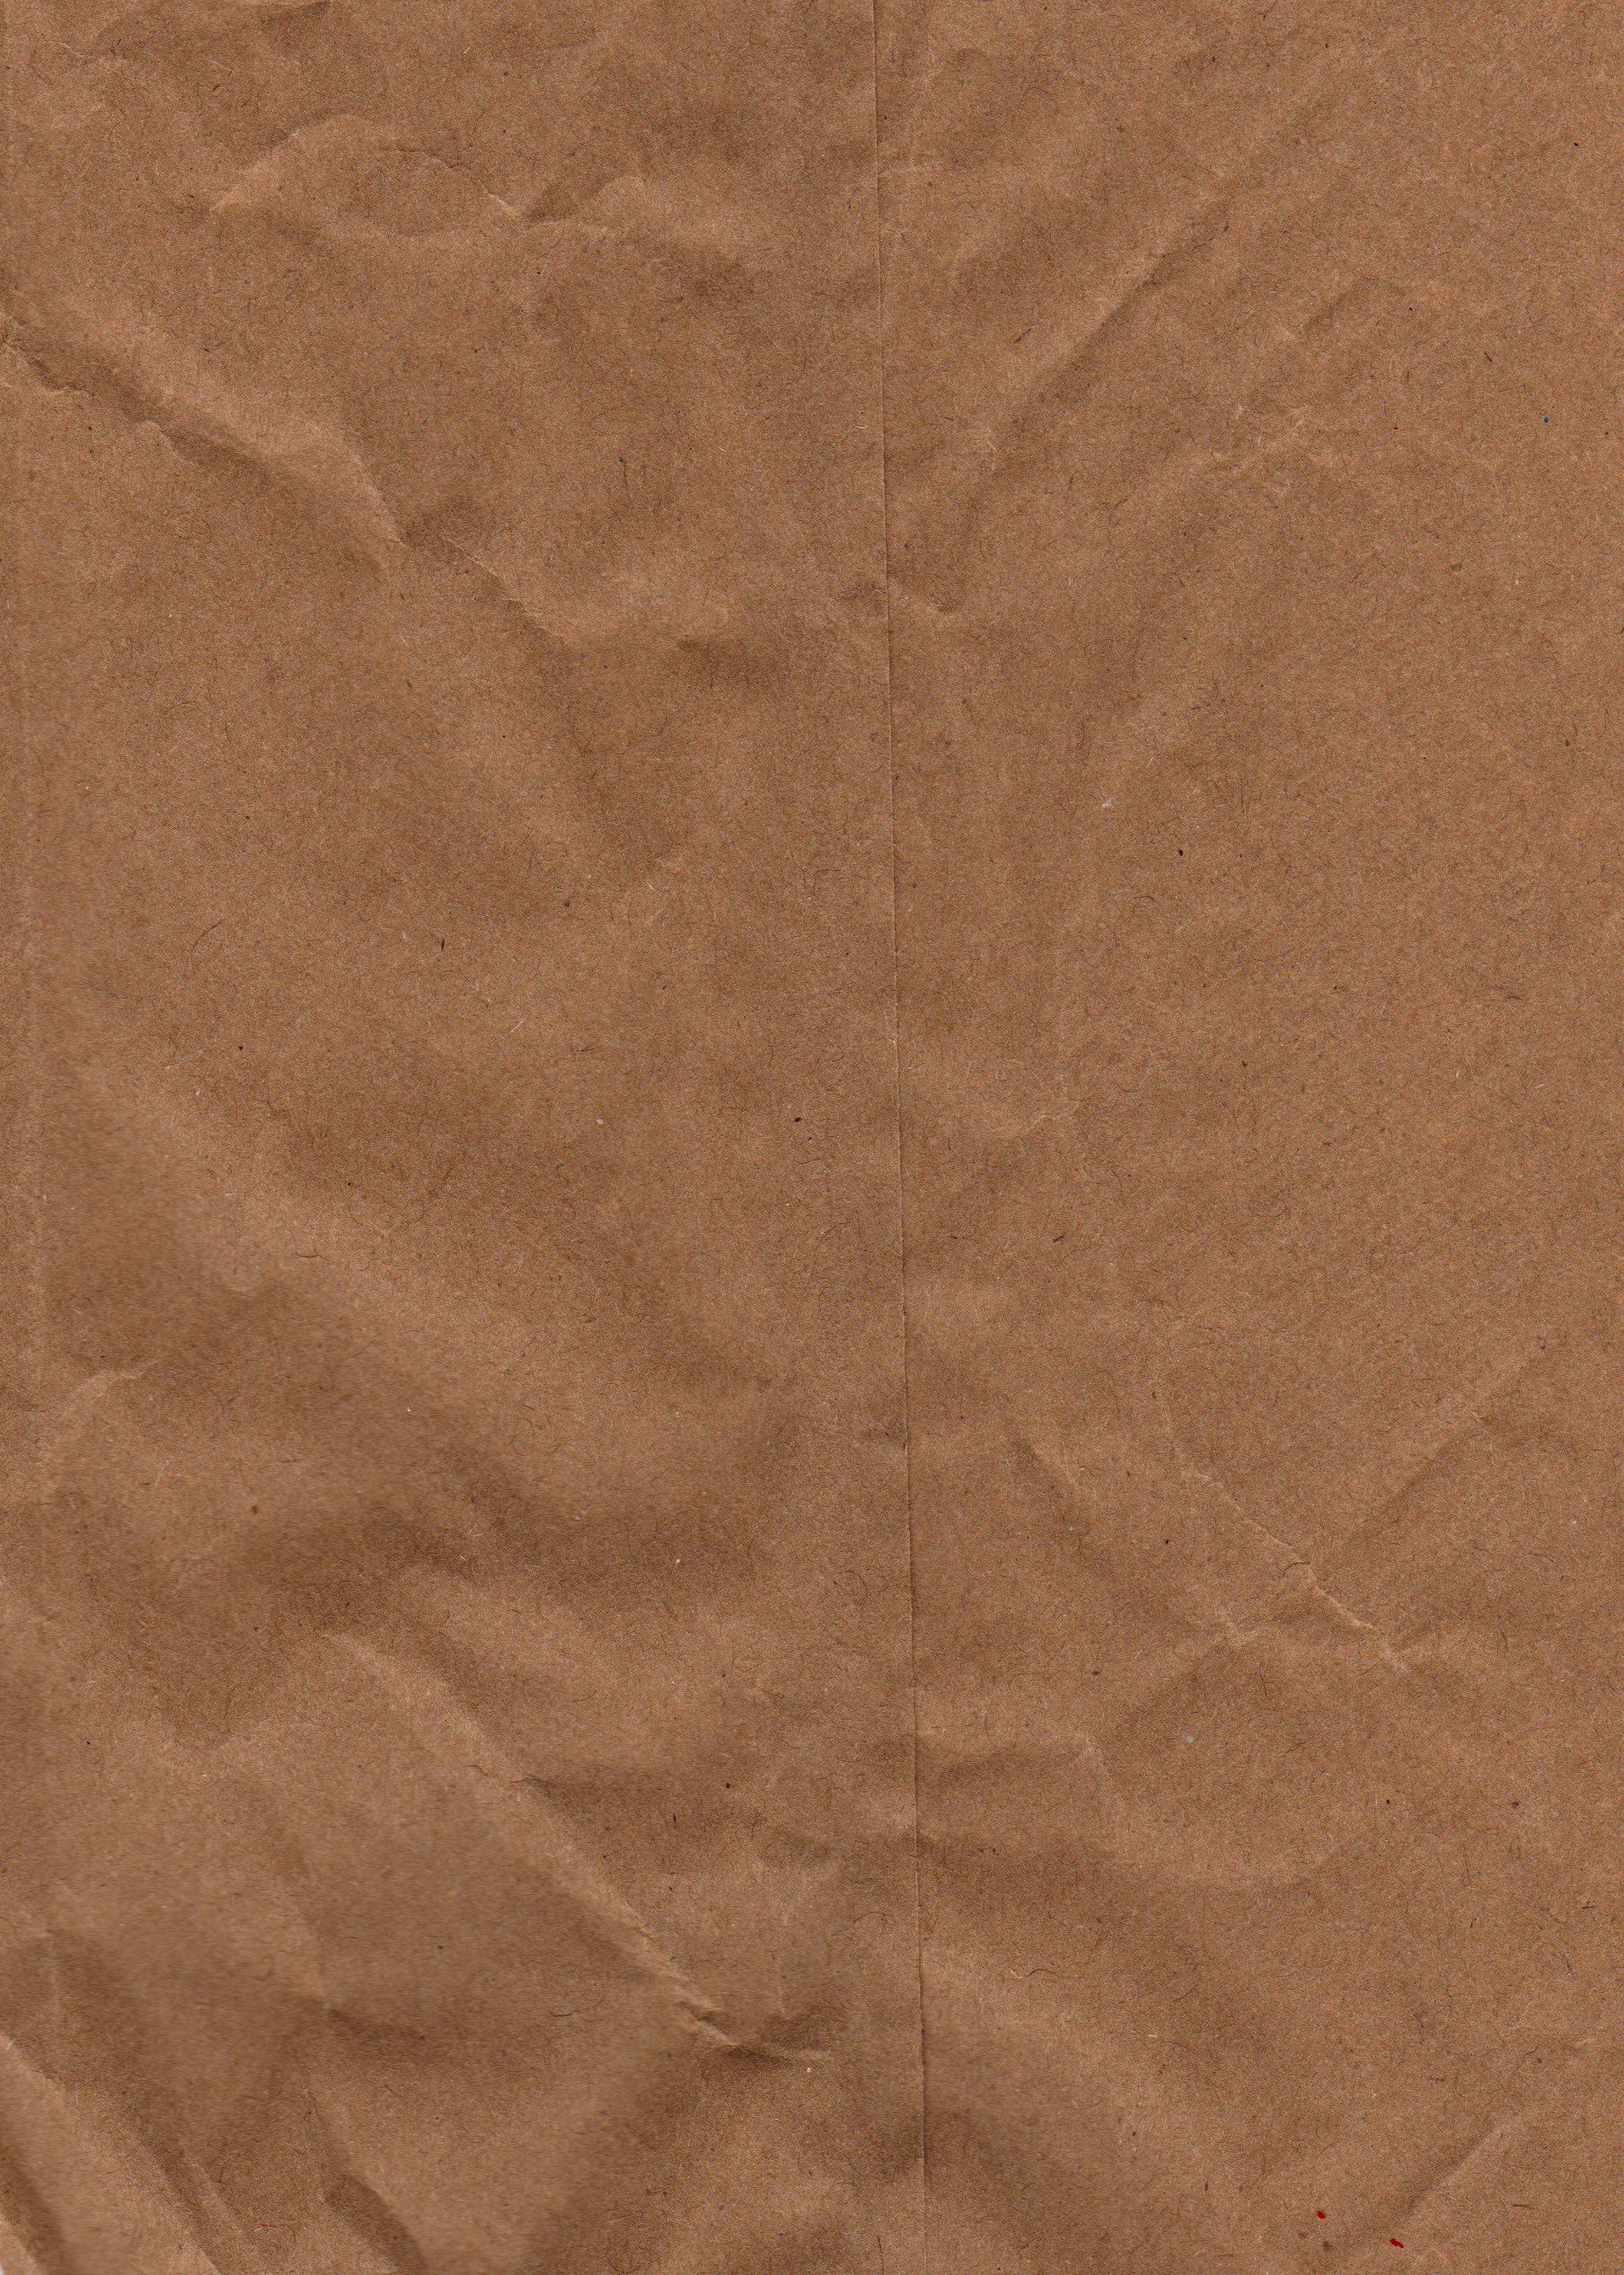 Brown Paper Bag Texture | Textures, Patterns & Backgrounds ...